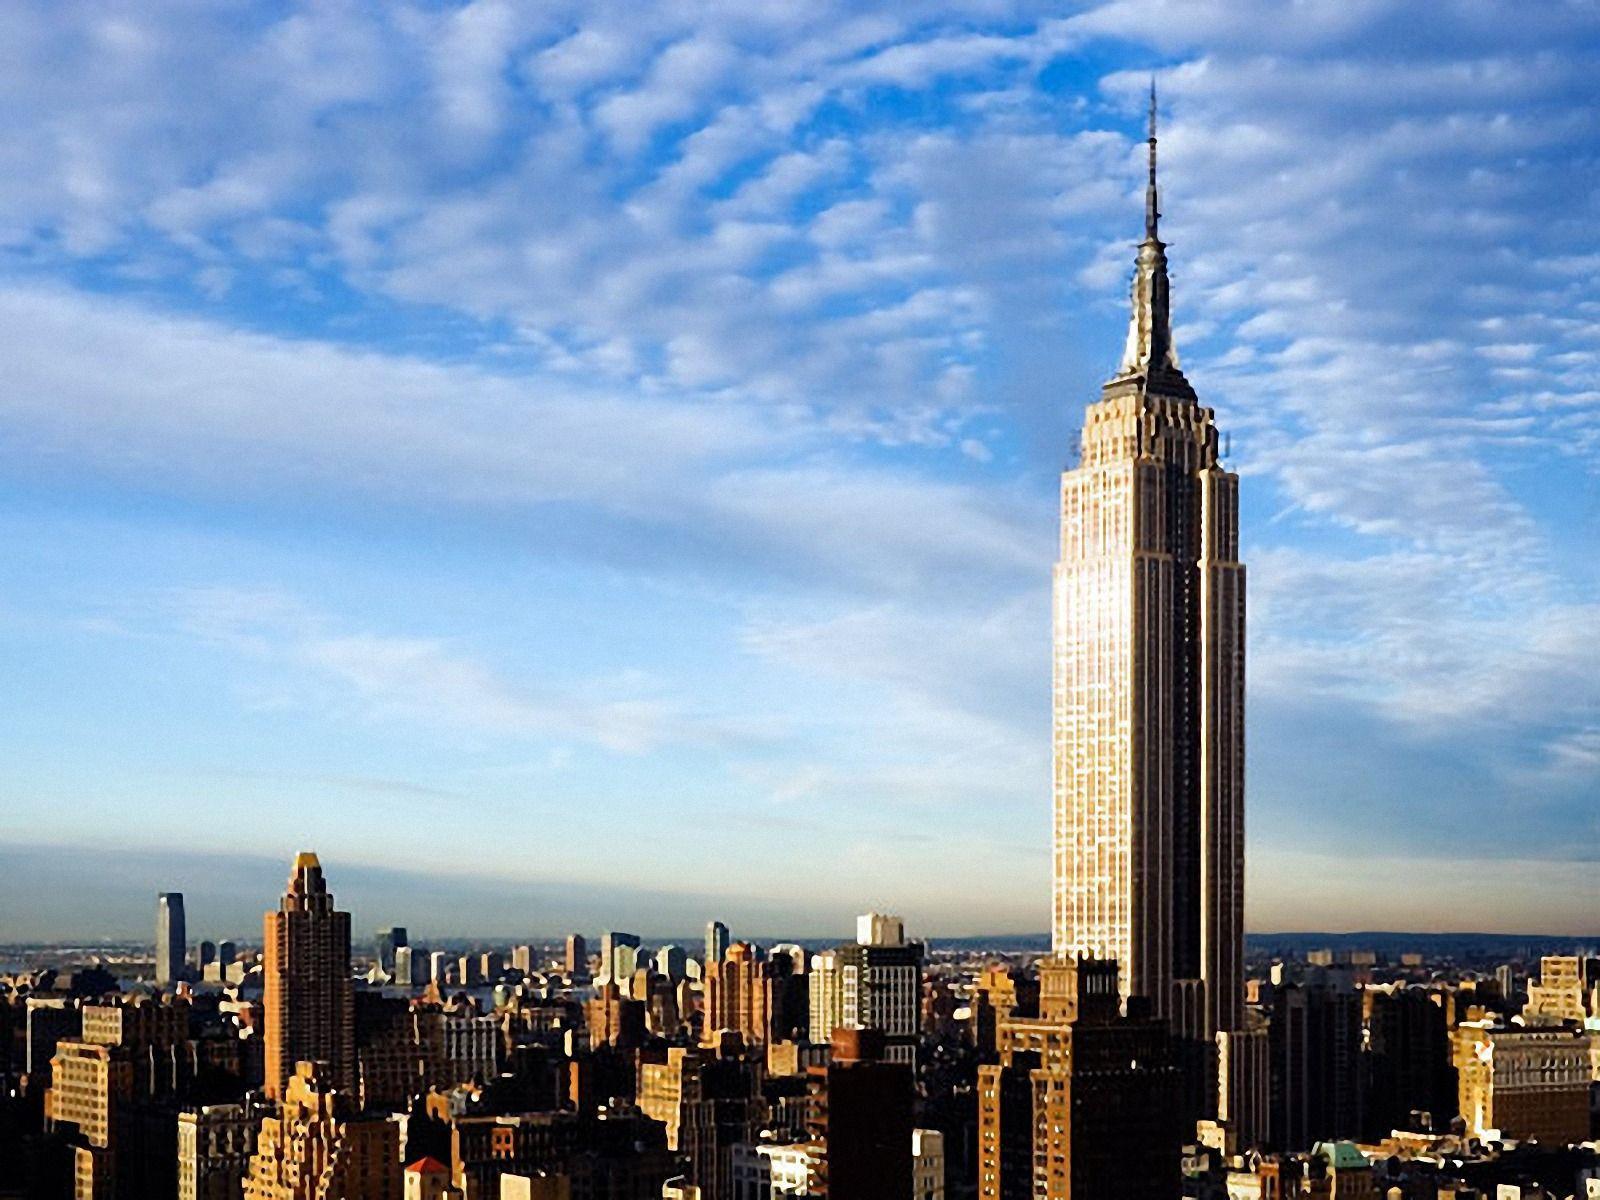 For Your Desktop: Empire State Building Wallpaper, 41 Top Quality